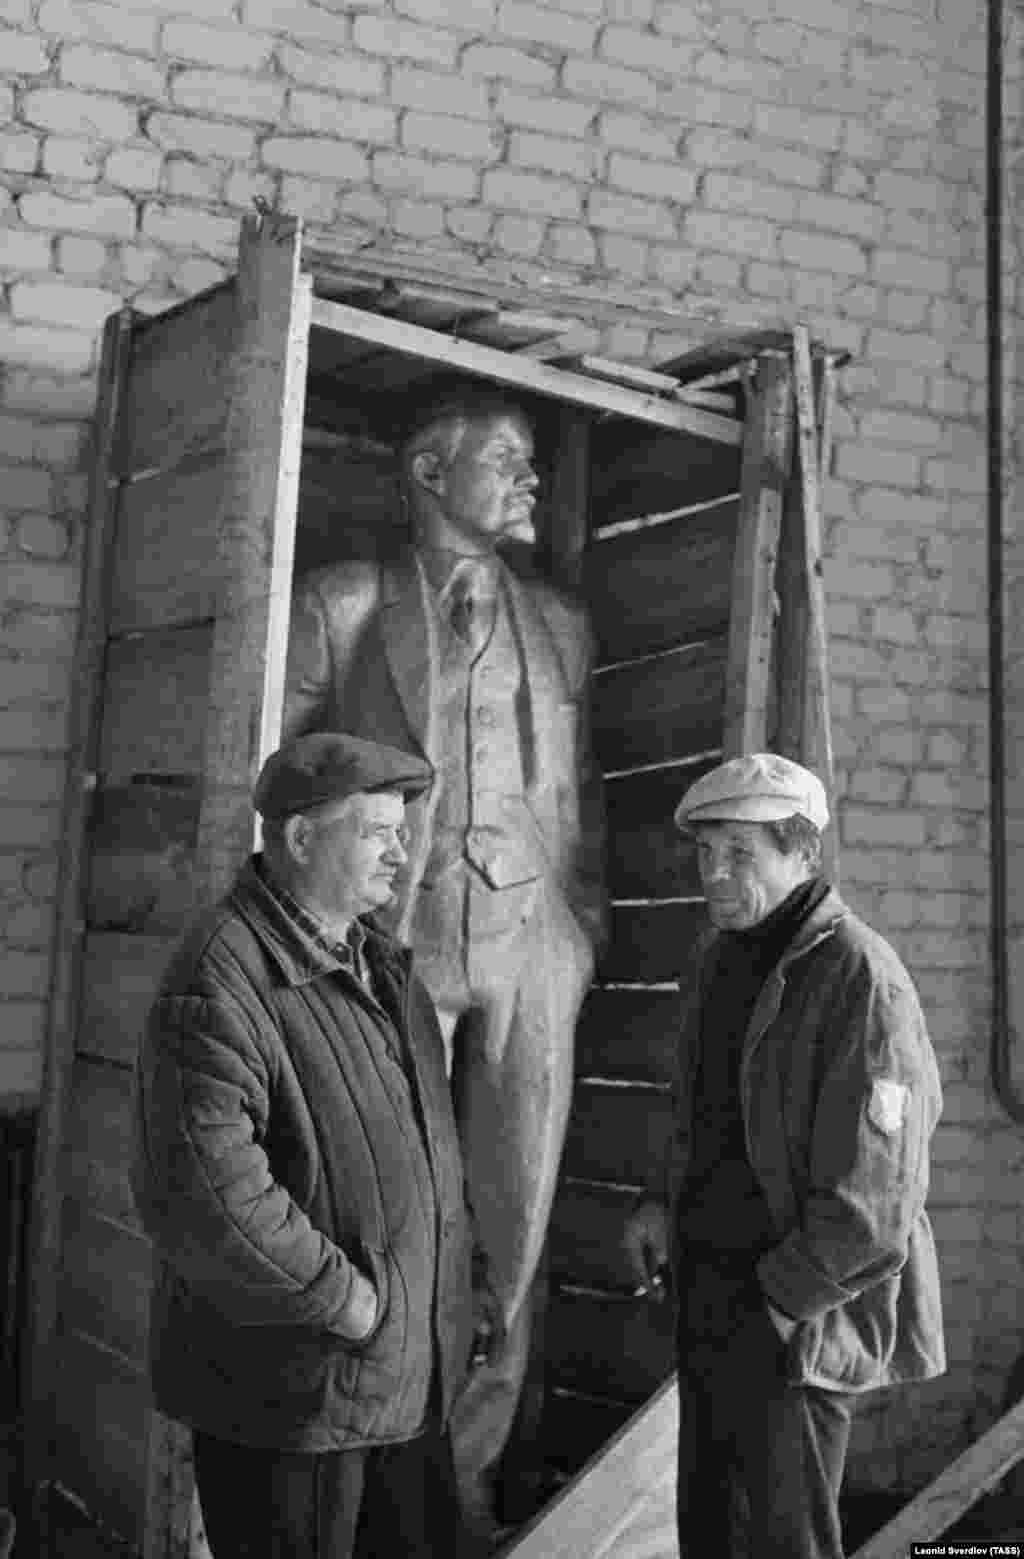 Workers near a boxed statue of Soviet founder Vladimir Lenin meant for display in Svyatsk, western Belarus, in September 1991. The newly delivered statue remained boxed, with the local authorities unsure what to do with the monument after Belarus won its independence from the Soviet Union one month before this photo was taken.